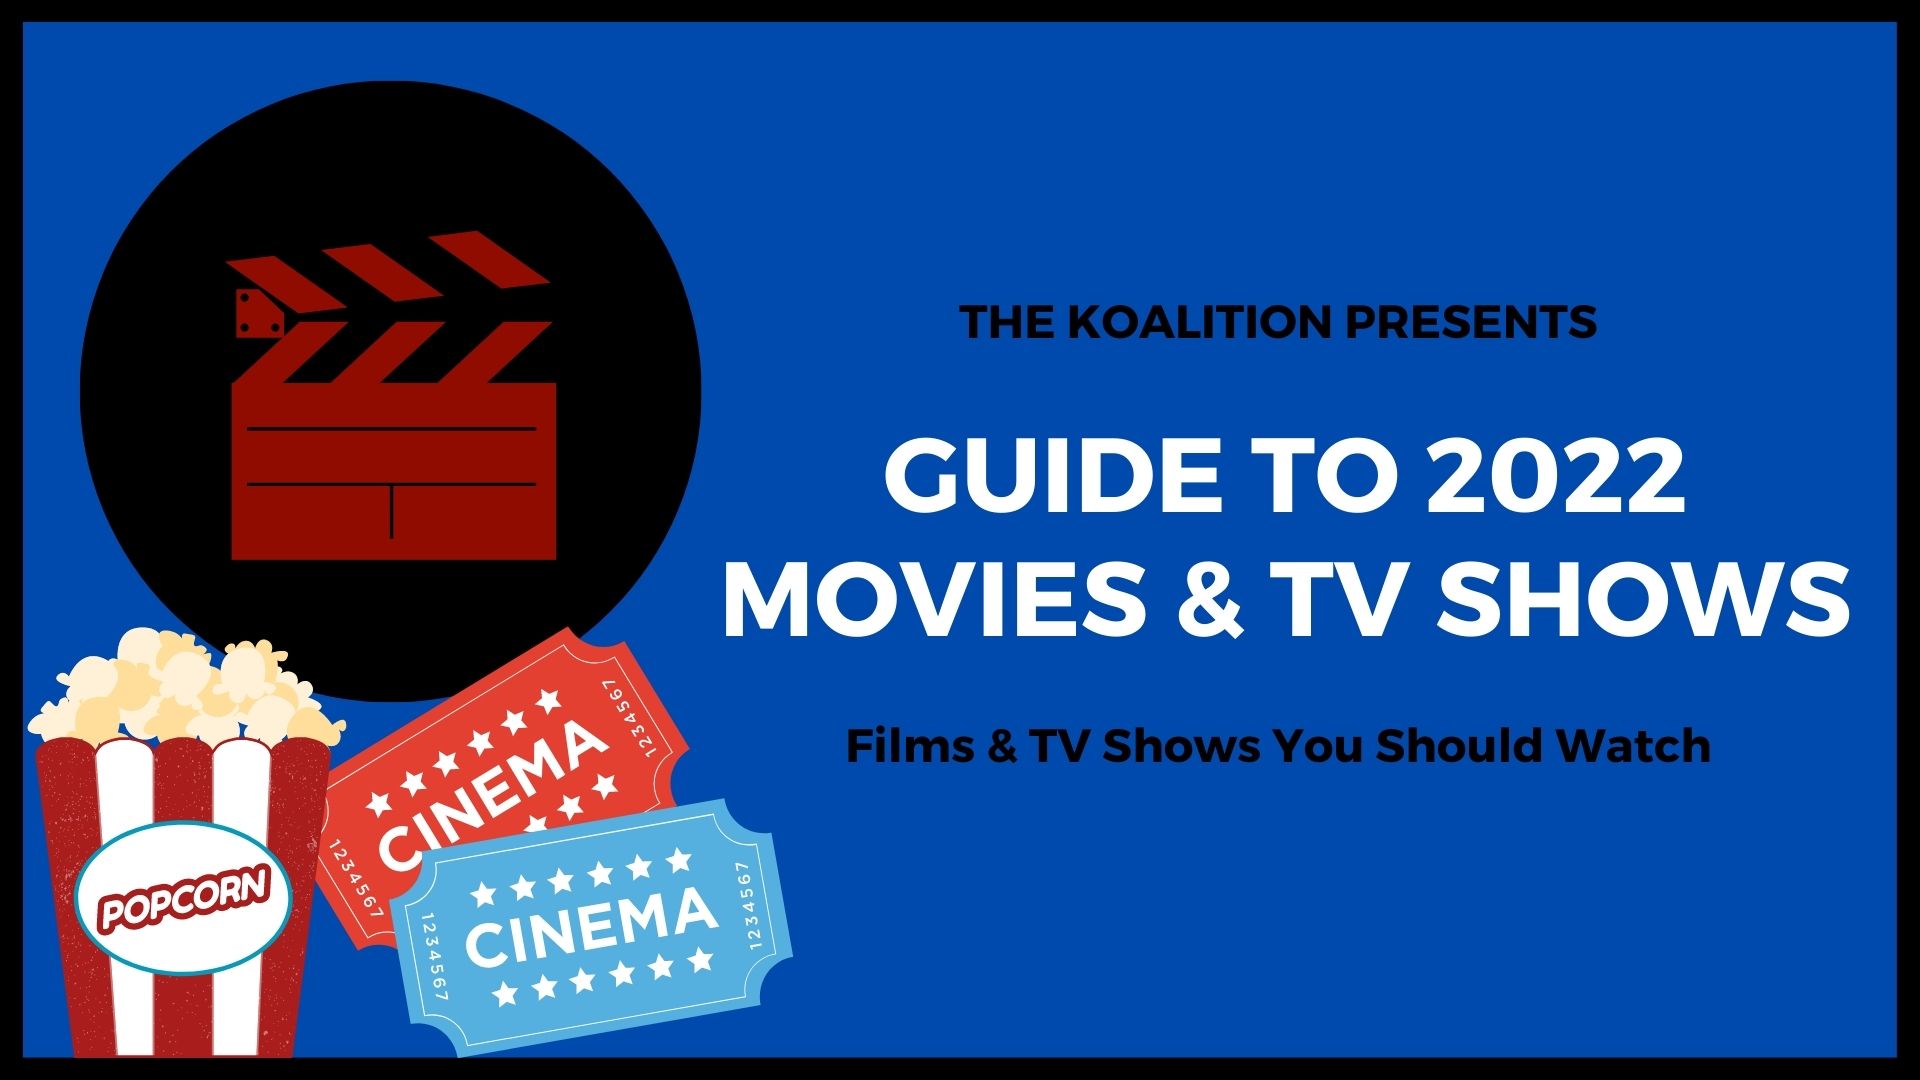 The Koalition’s Guide To 2022 Movies & TV Shows – The Koalition